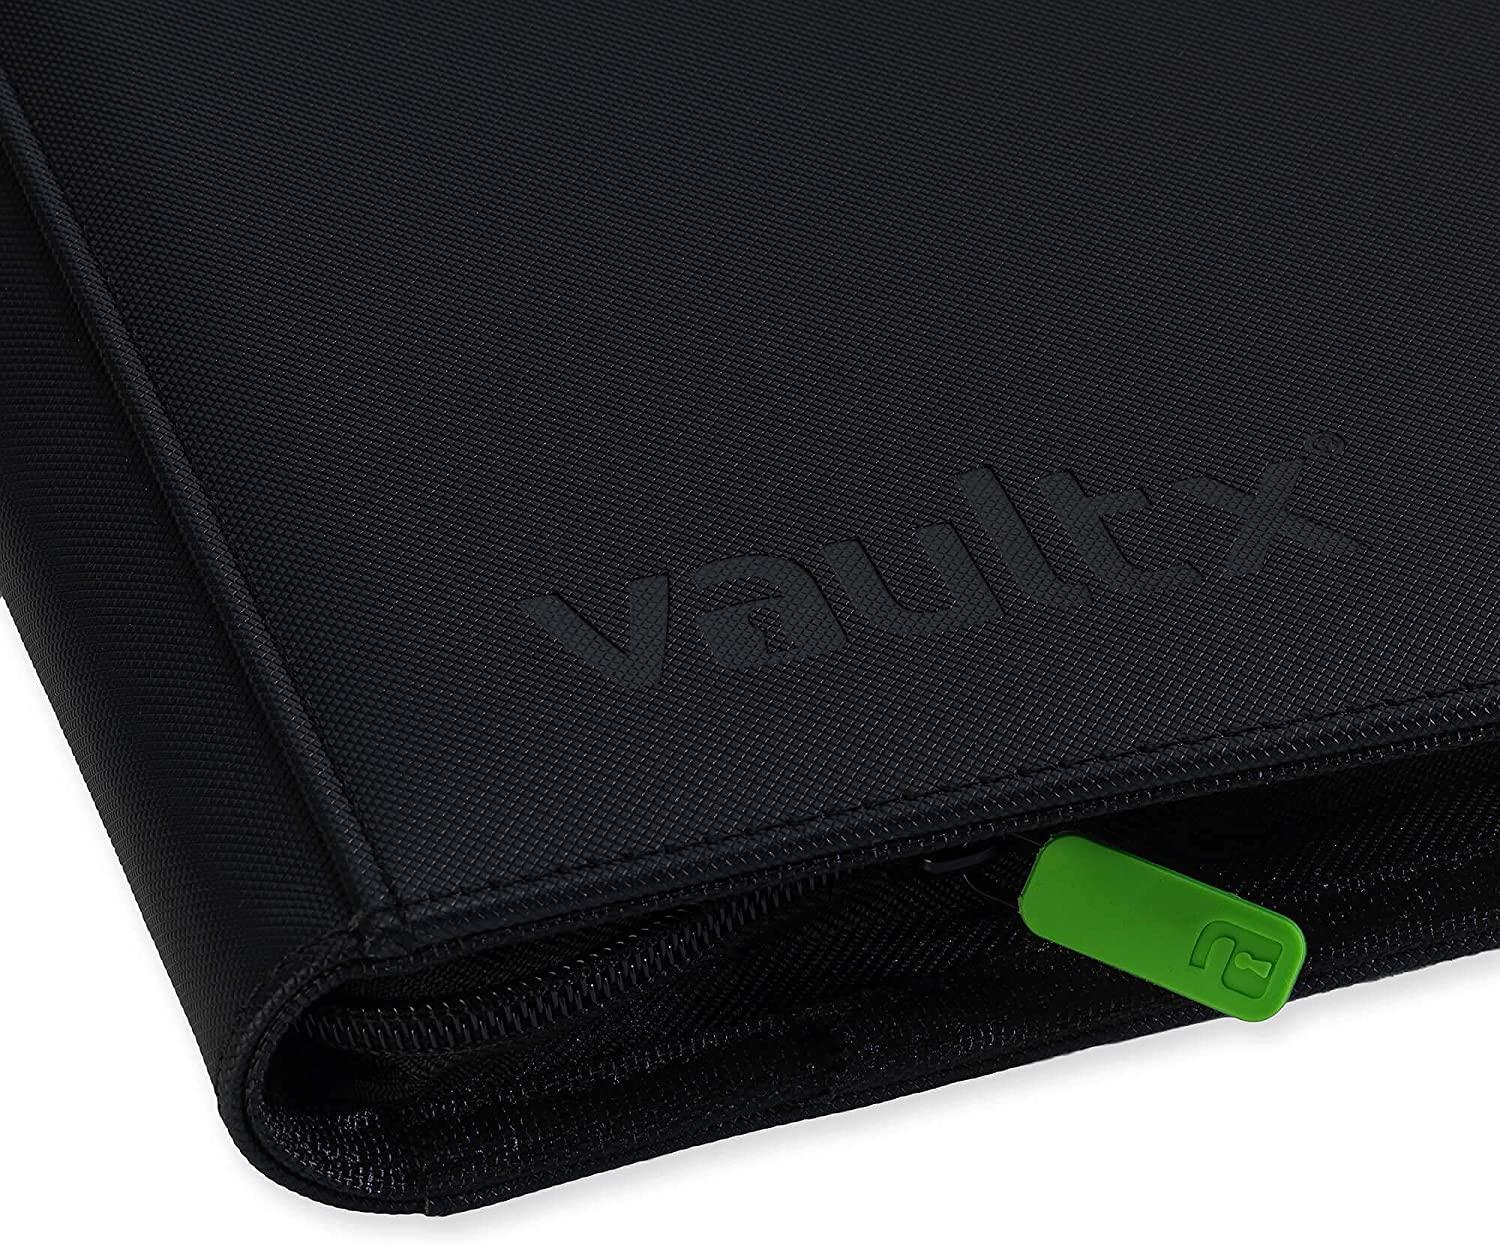  Vault X Premium Exo-Tec Zip Binder 12 Pocket, 20 Double-Sided  Pages for 480 Side-Loading Slots for Board, Collectible or Trading Card  Game Protective Folder Album (Green) : Toys & Games